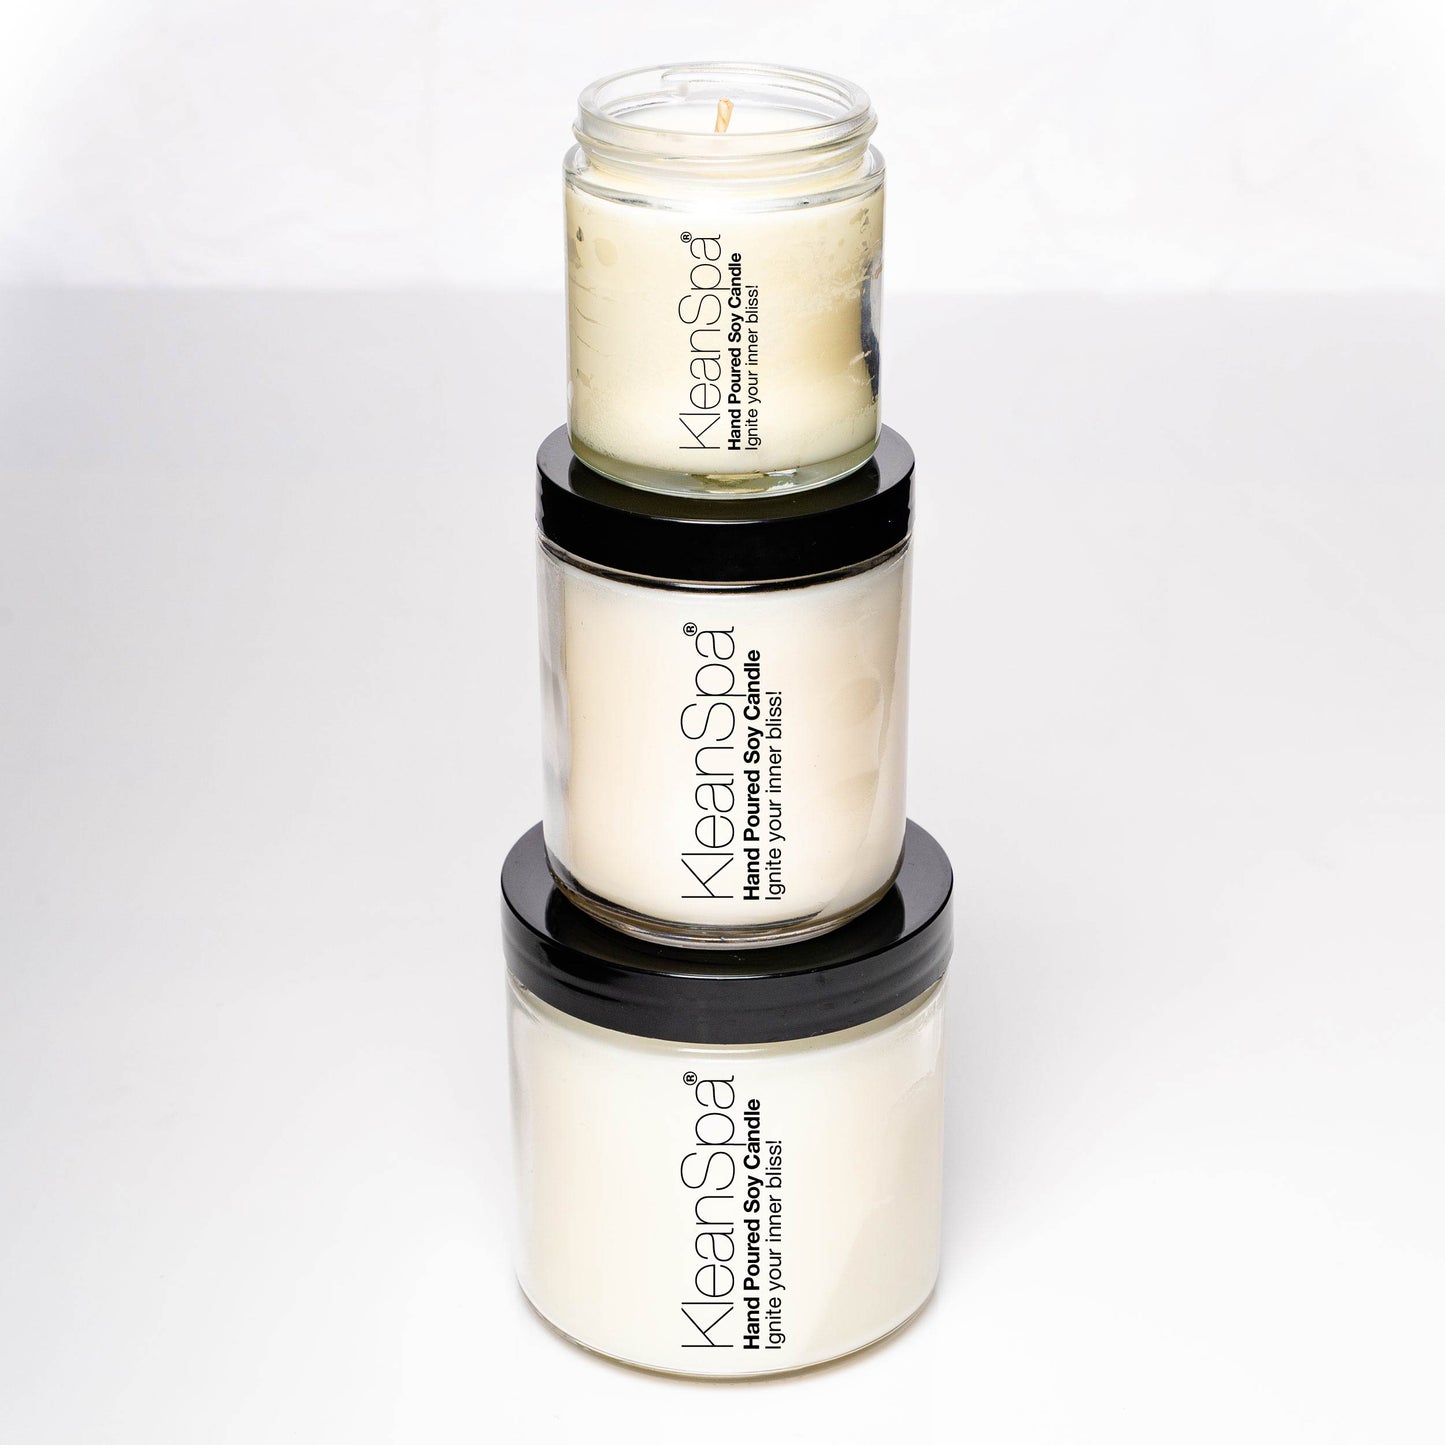 stack of eco-friendly, natural soy candles